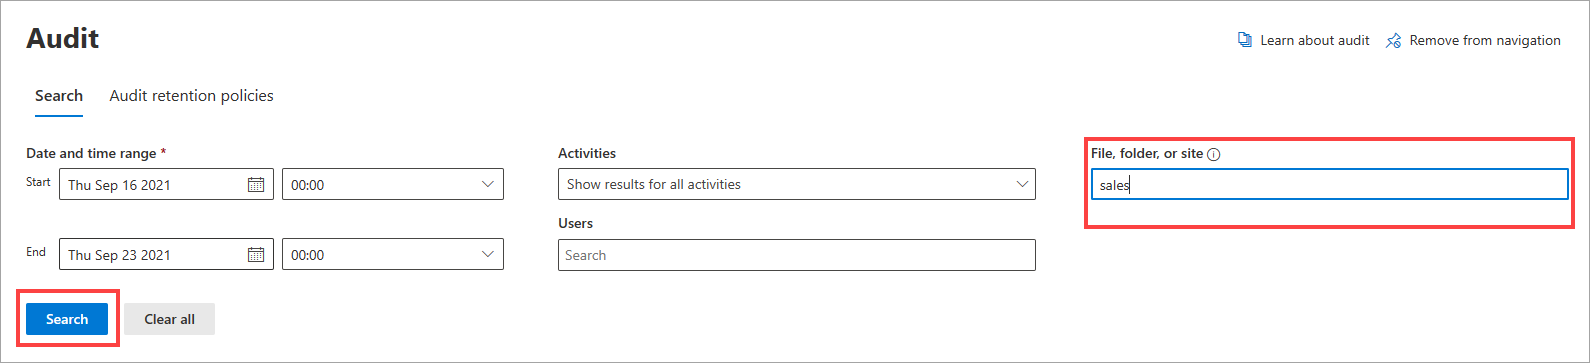 Screenshot of the Audit log search with file, folder, or site field called out.